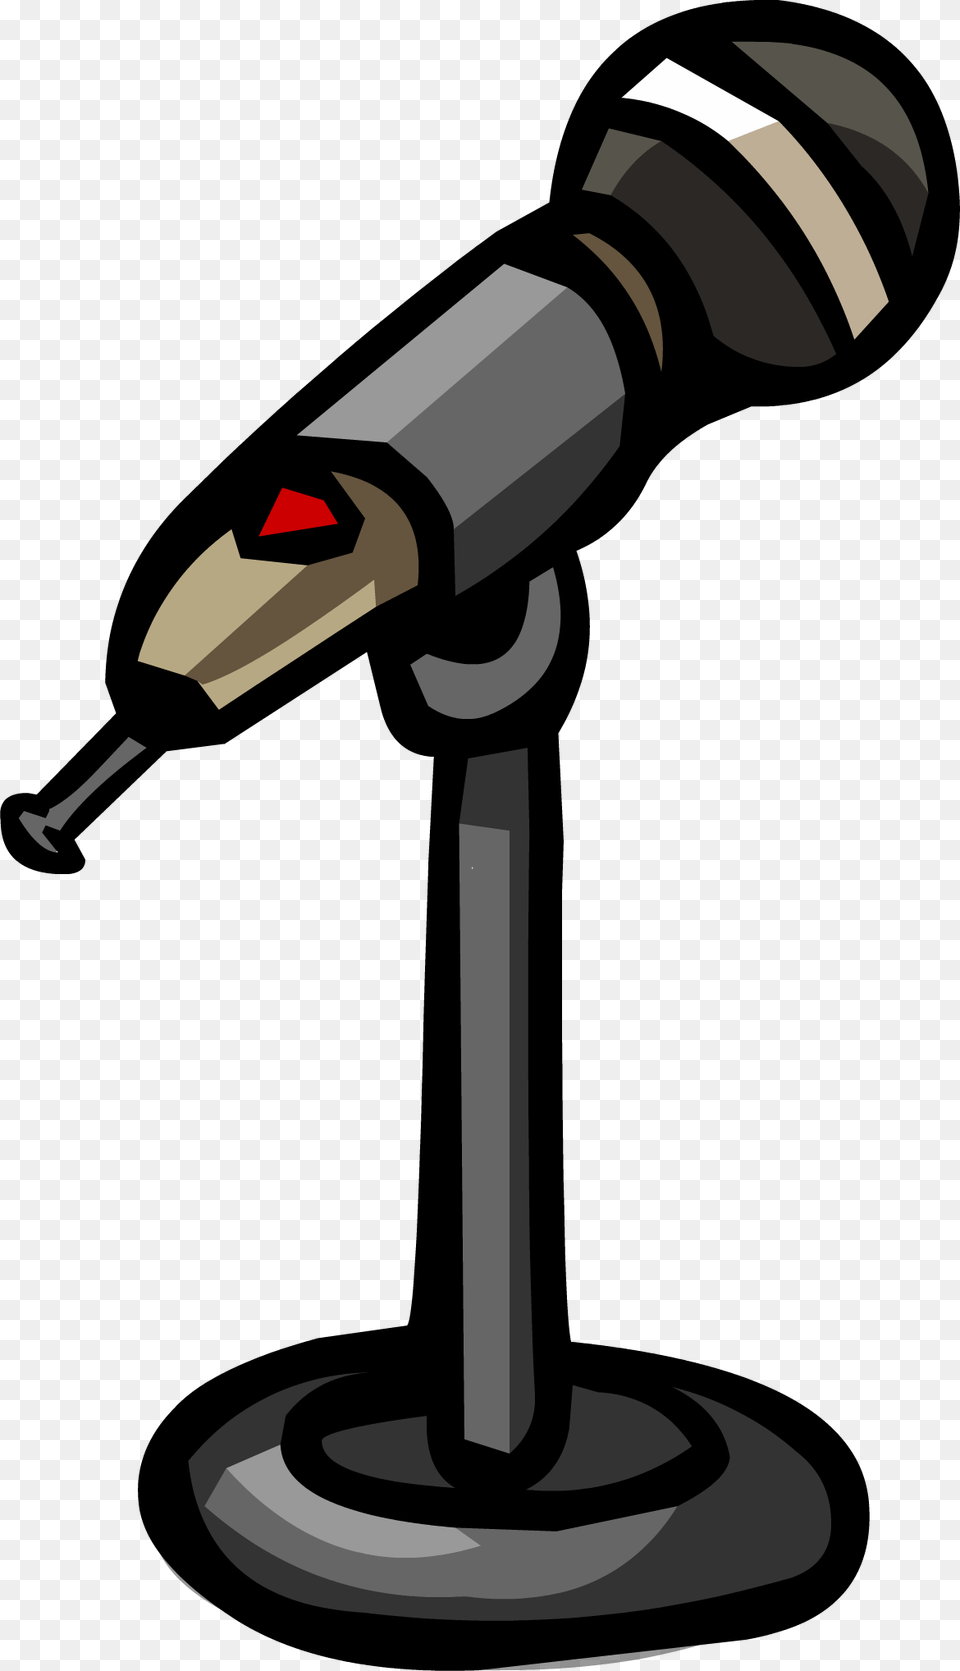 Electrical Device, Microphone, Cross, Symbol Png Image